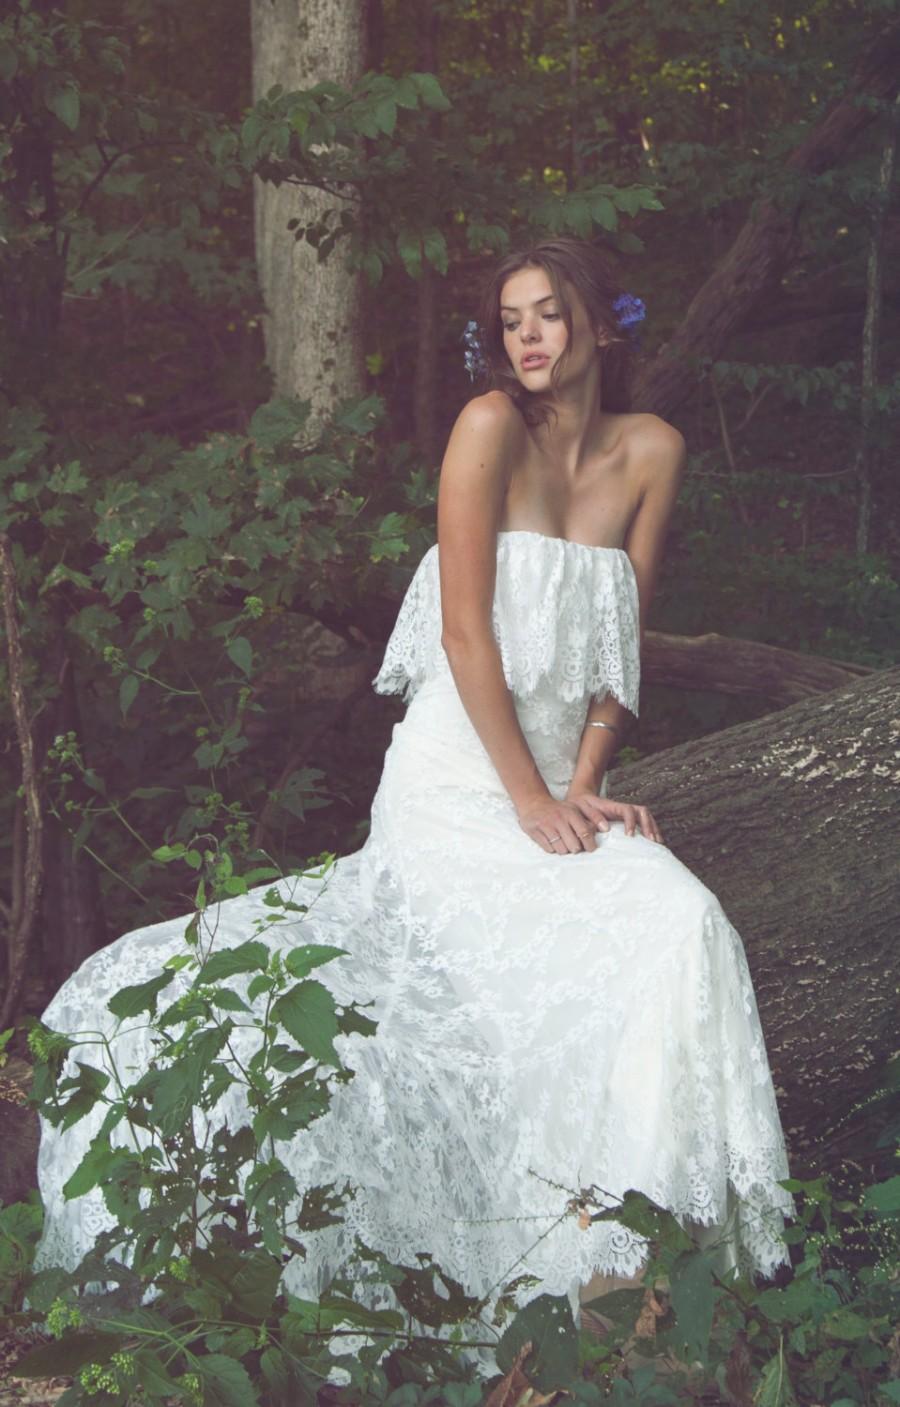 Wedding - Strapless Bridal Gown, Bohemian Wedding Dress, Lace Wedding Gown - "Iver"